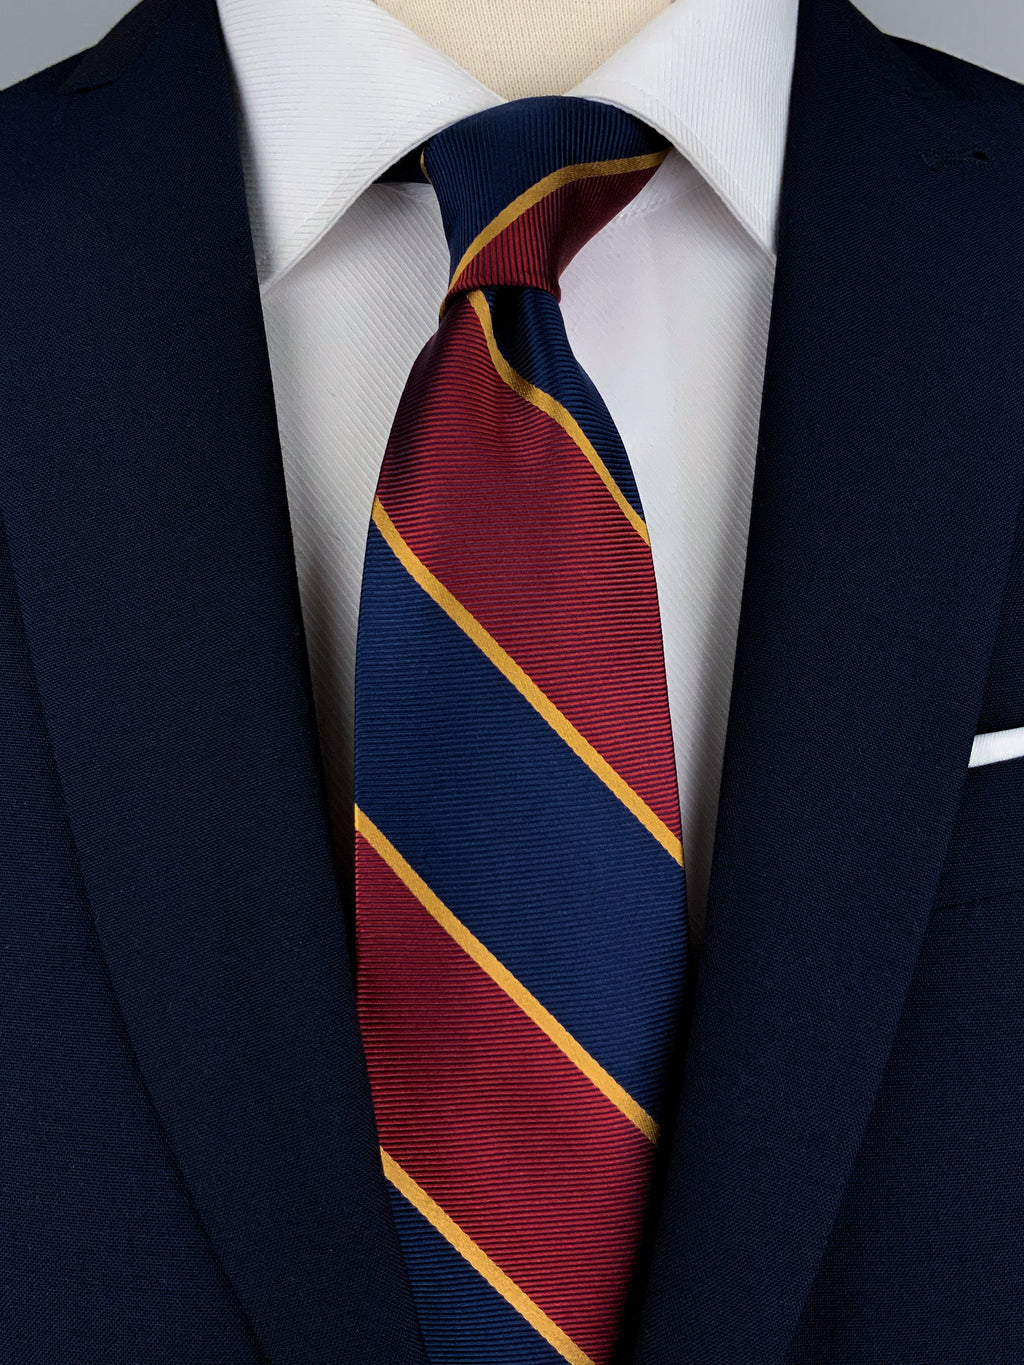 Mulberry silk twill regimental tie with navy blue and red diagonal stripes with woven gold detailing worn with a white shirt and a navy blue suit